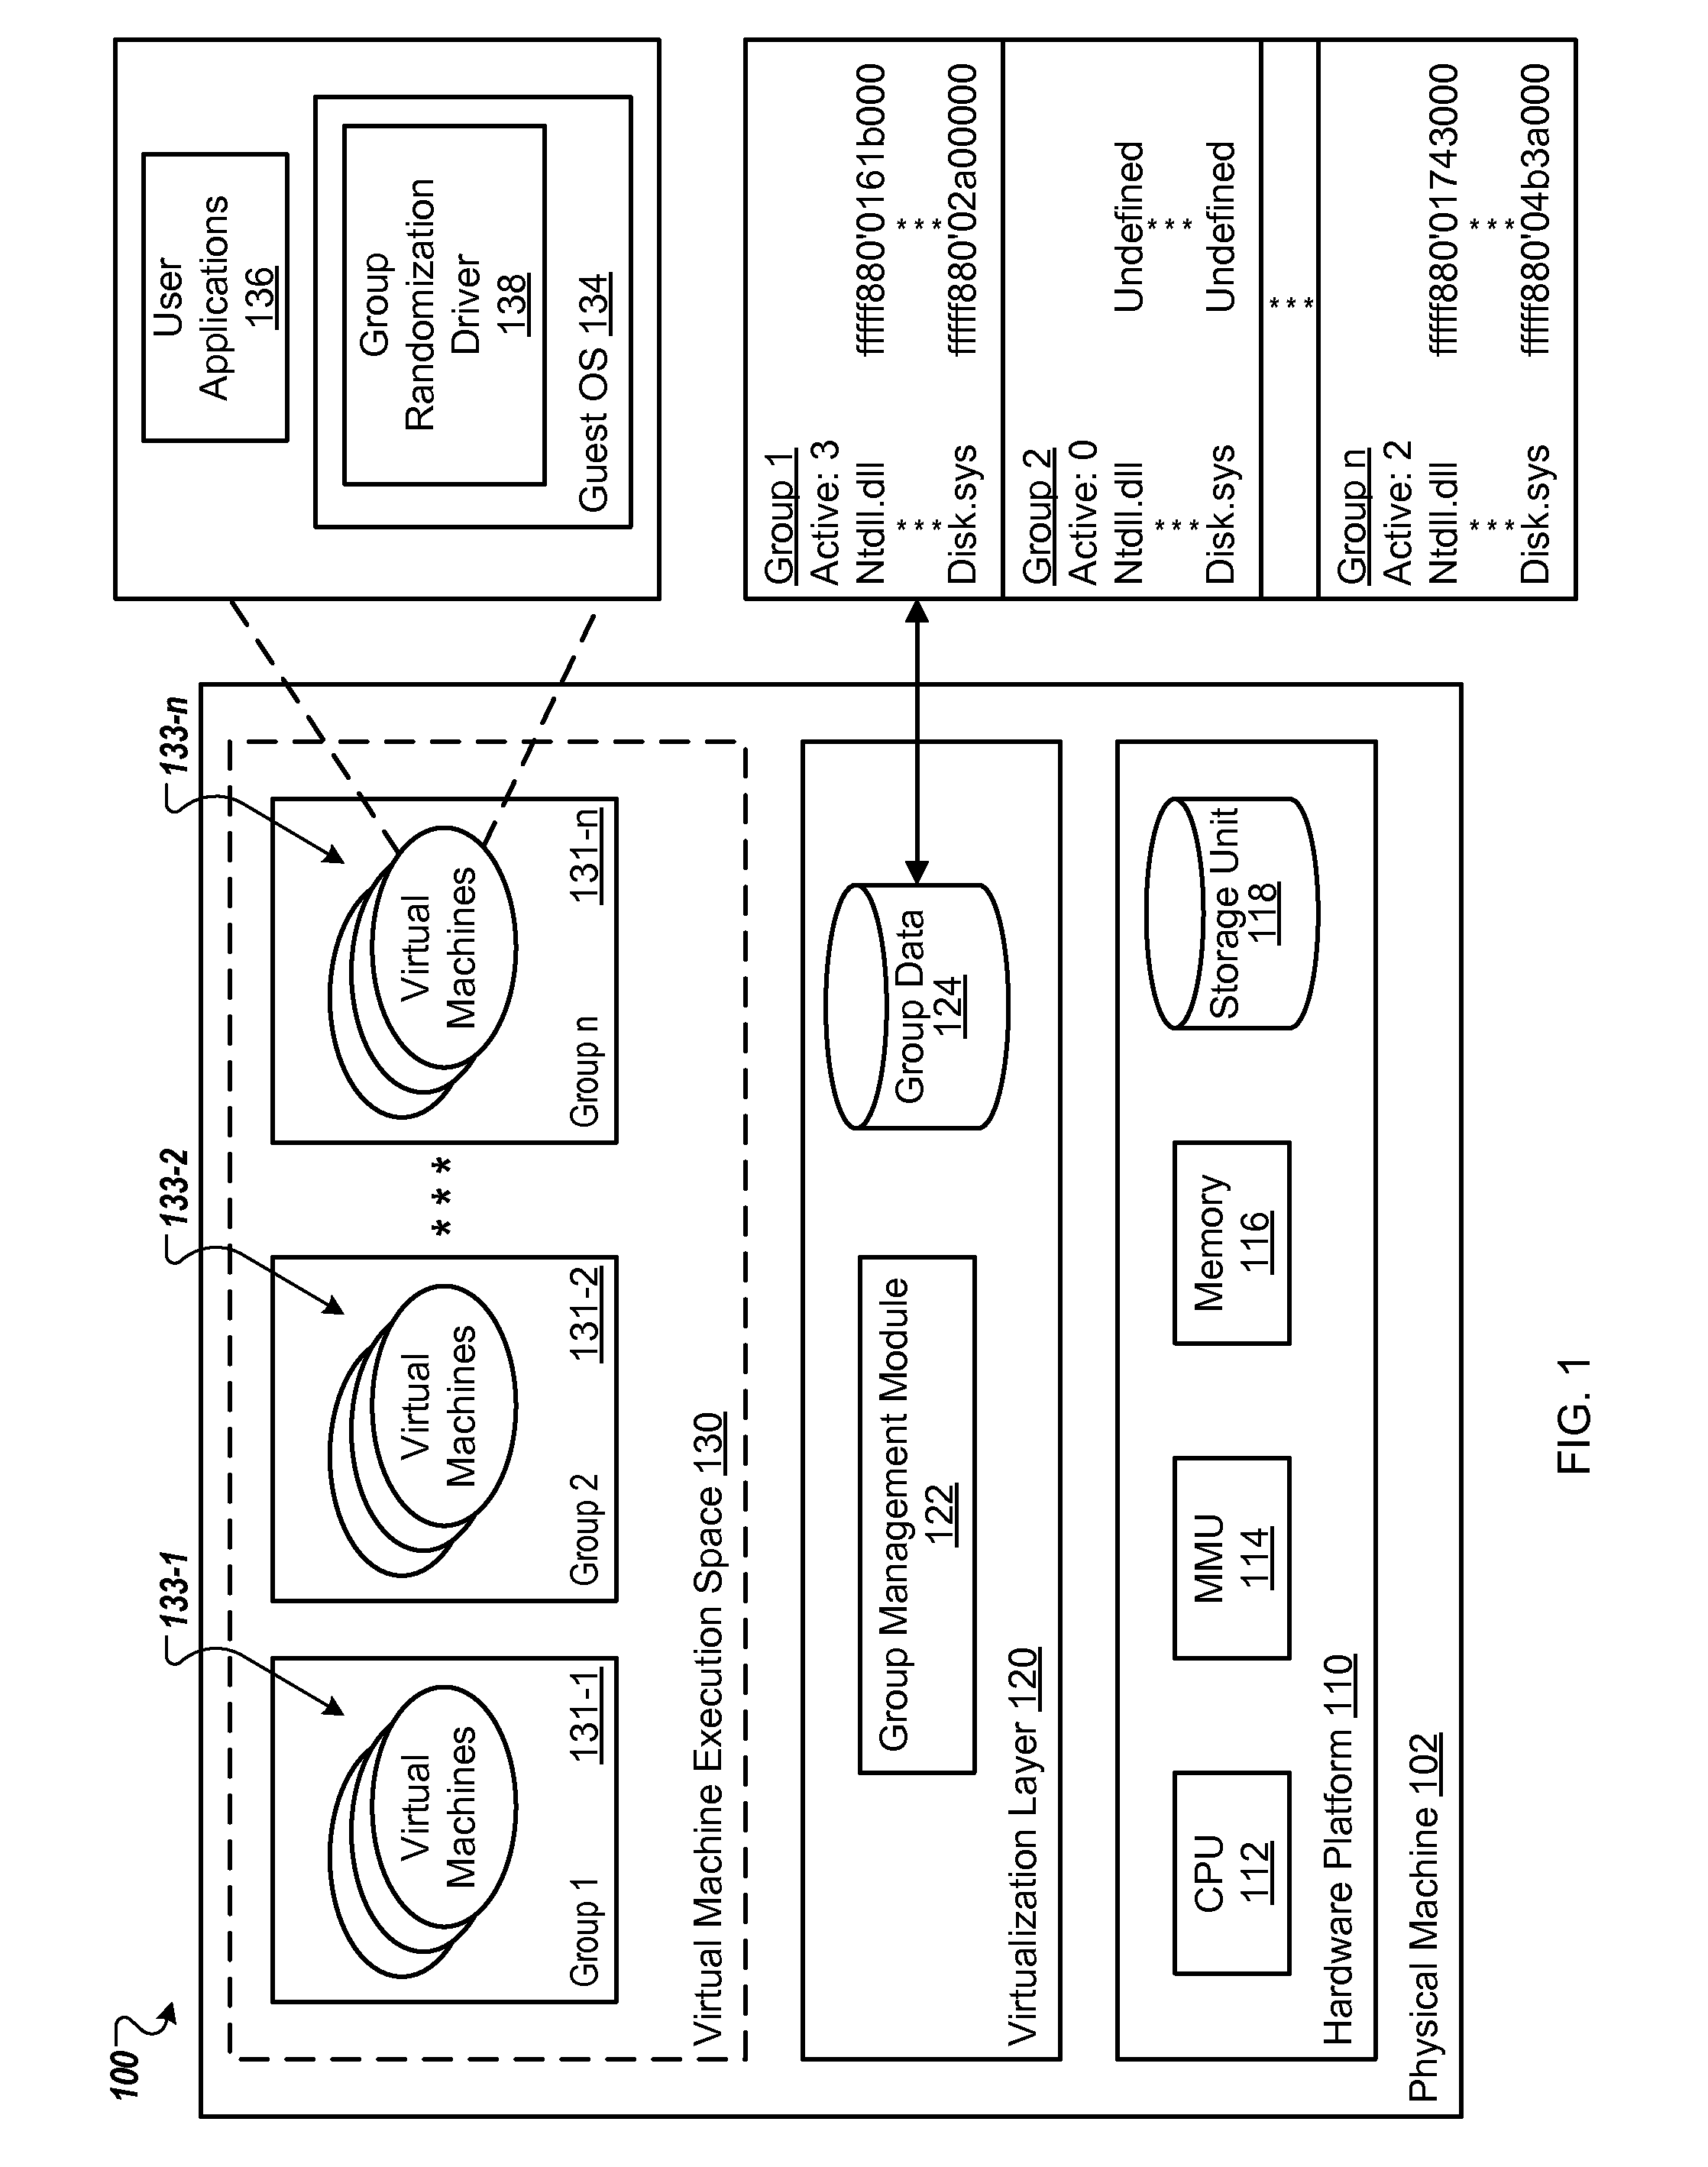 Optimizing memory sharing in a virtualized computer system with address space layout randomization enabled in guest operating systems